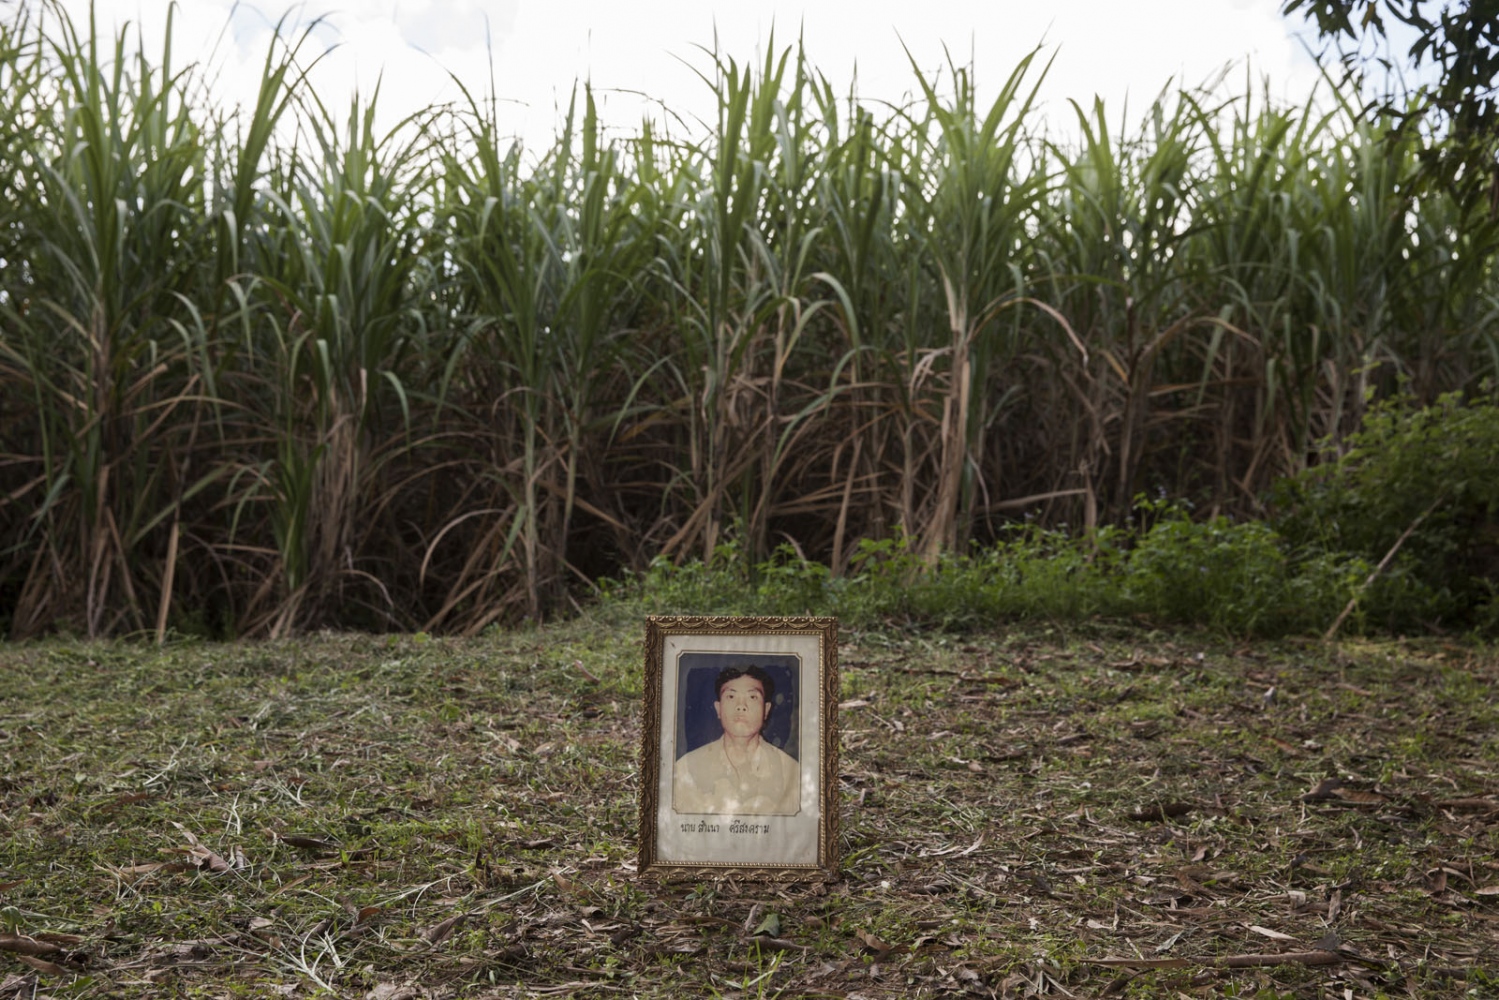 FOR THOSE WHO DIED TRYING -  Samnao Srisongkhram, 38, was shot dead in a field near...